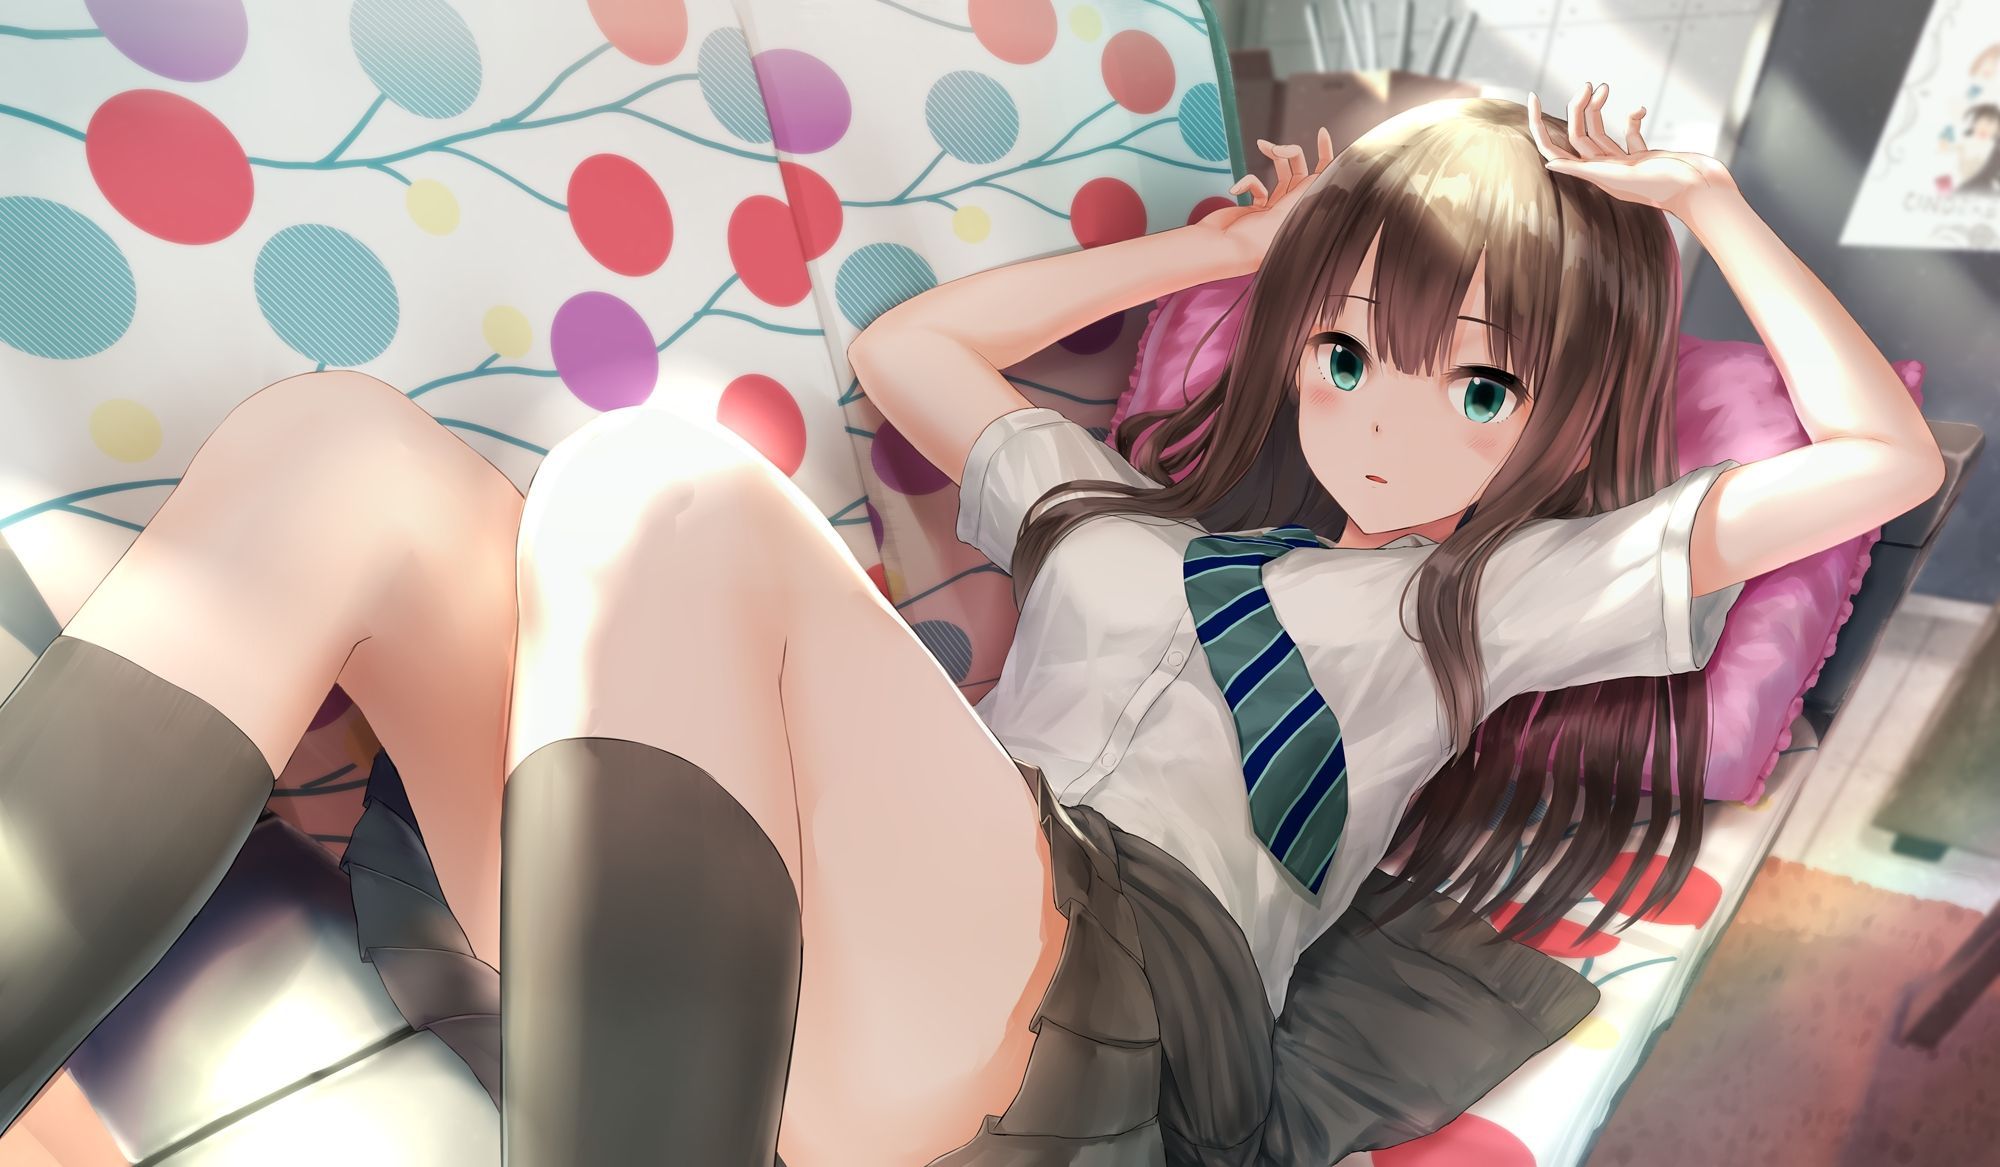 [Secondary ZIP] cool and sometimes roughing de mas Shibuya Rin-chan's image roundup 100 pieces 1